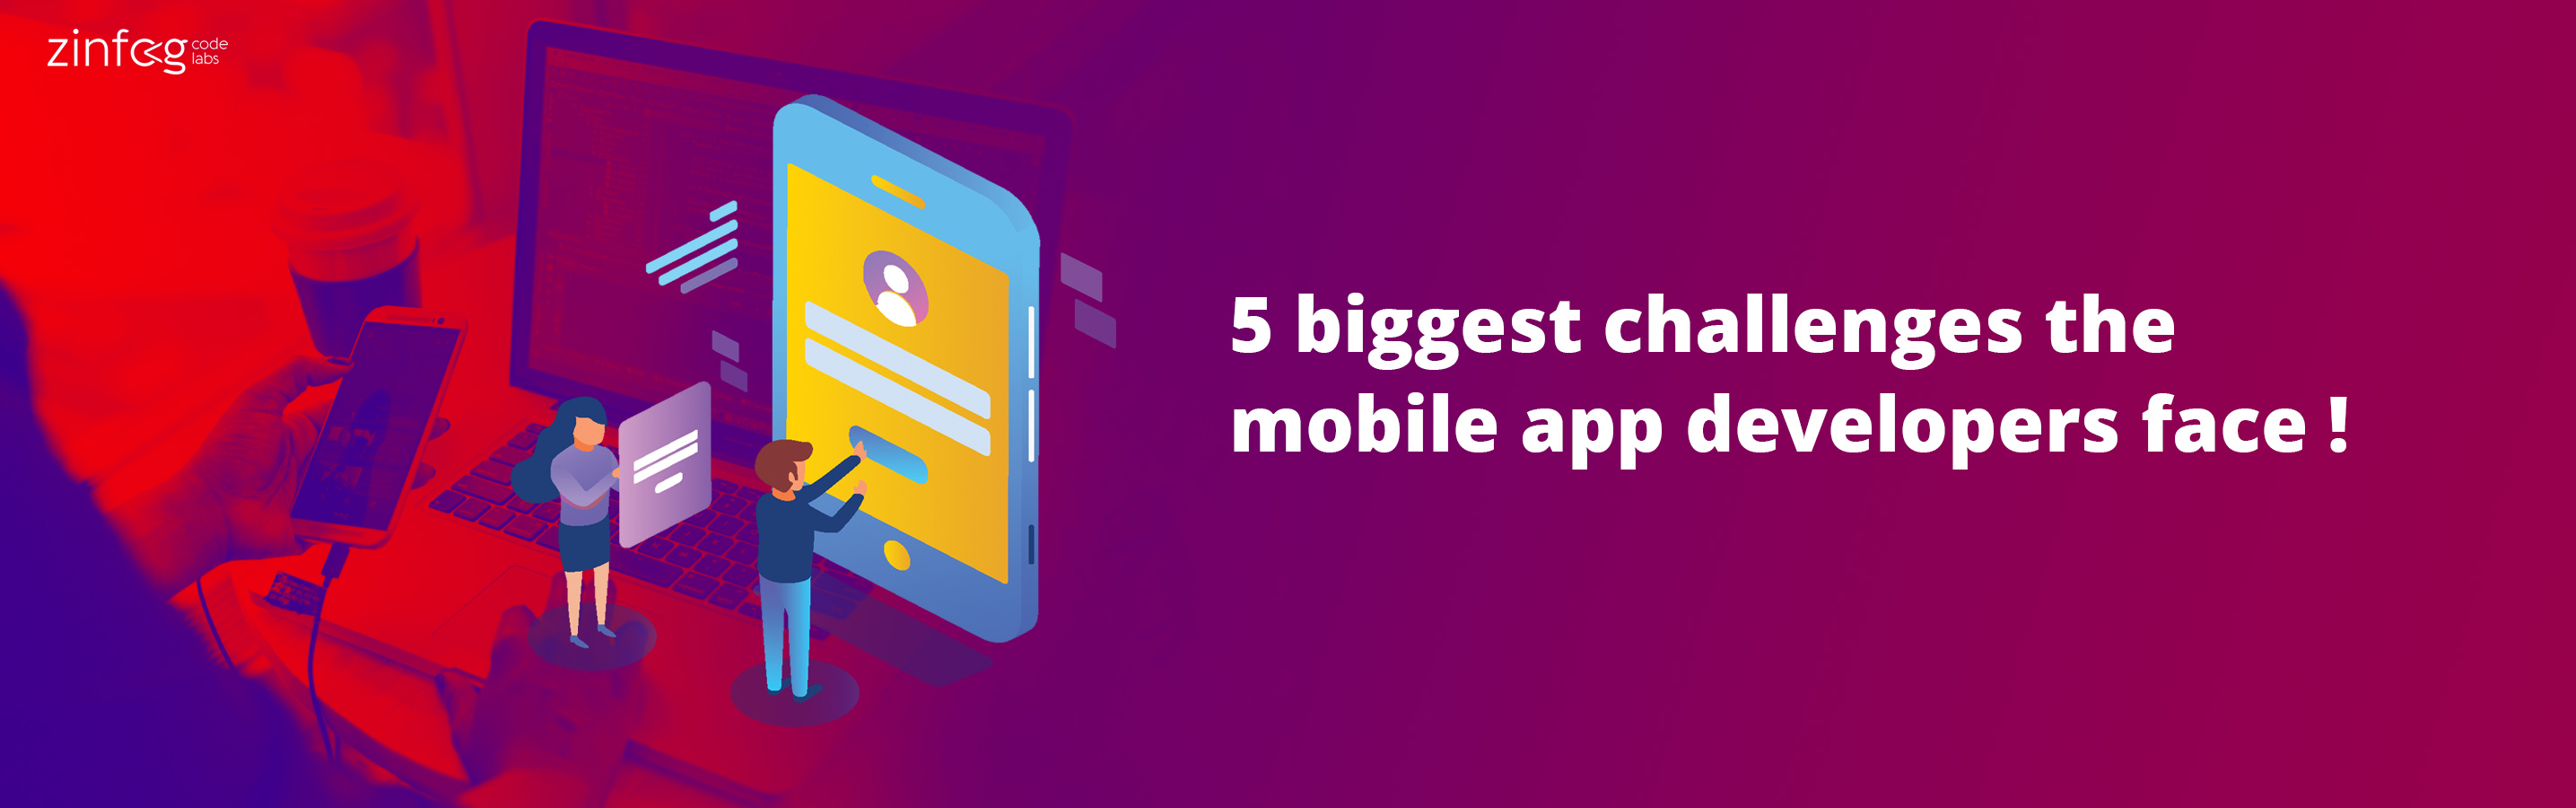 5_biggest_challenges_the_mobile_app_developers_face.html